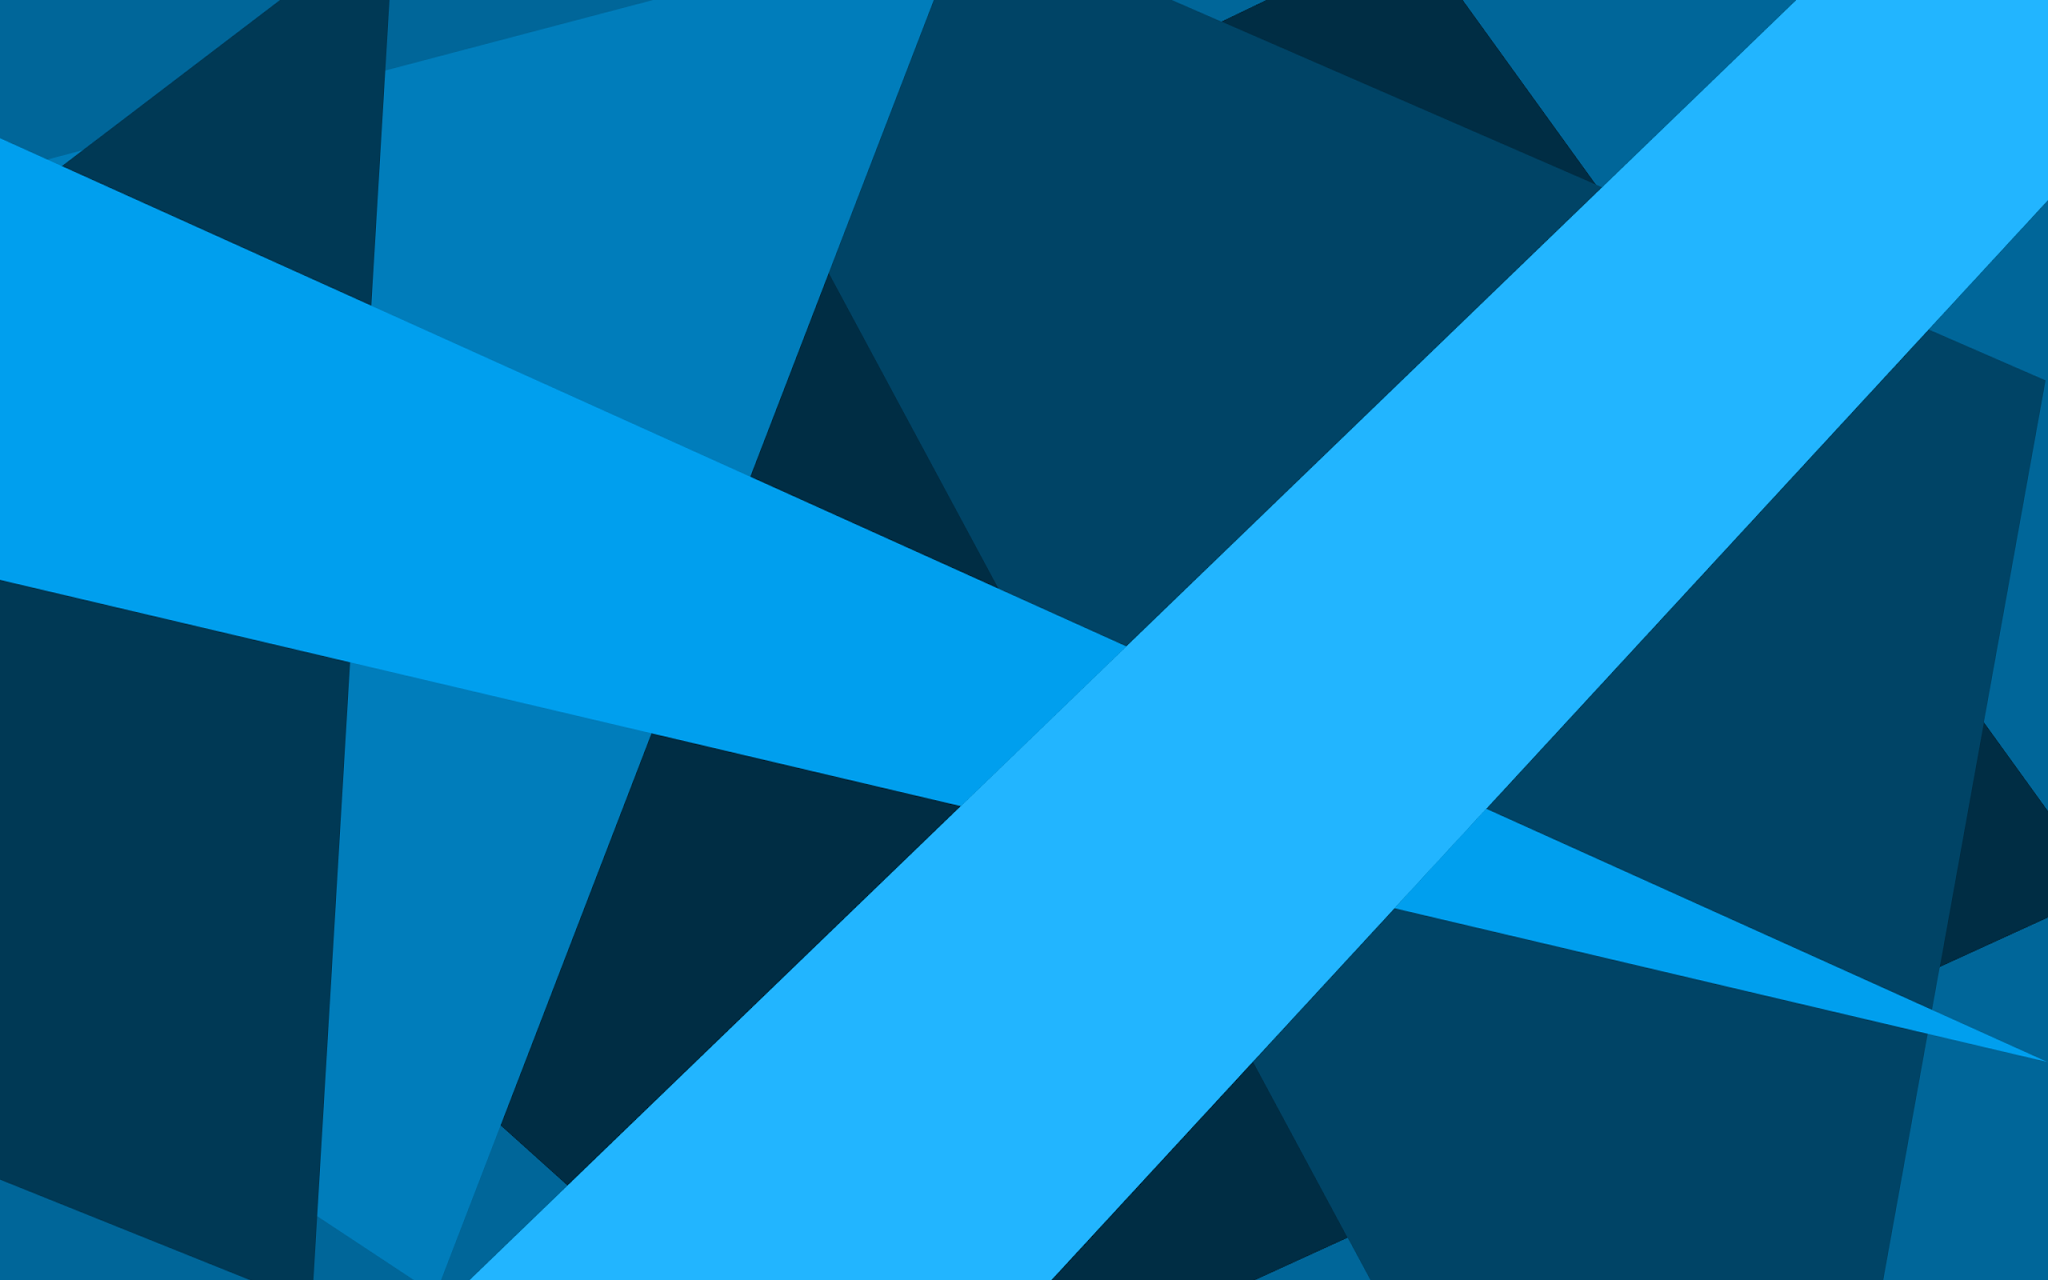 Best Material Design HD Wallpaper and Image Free Download